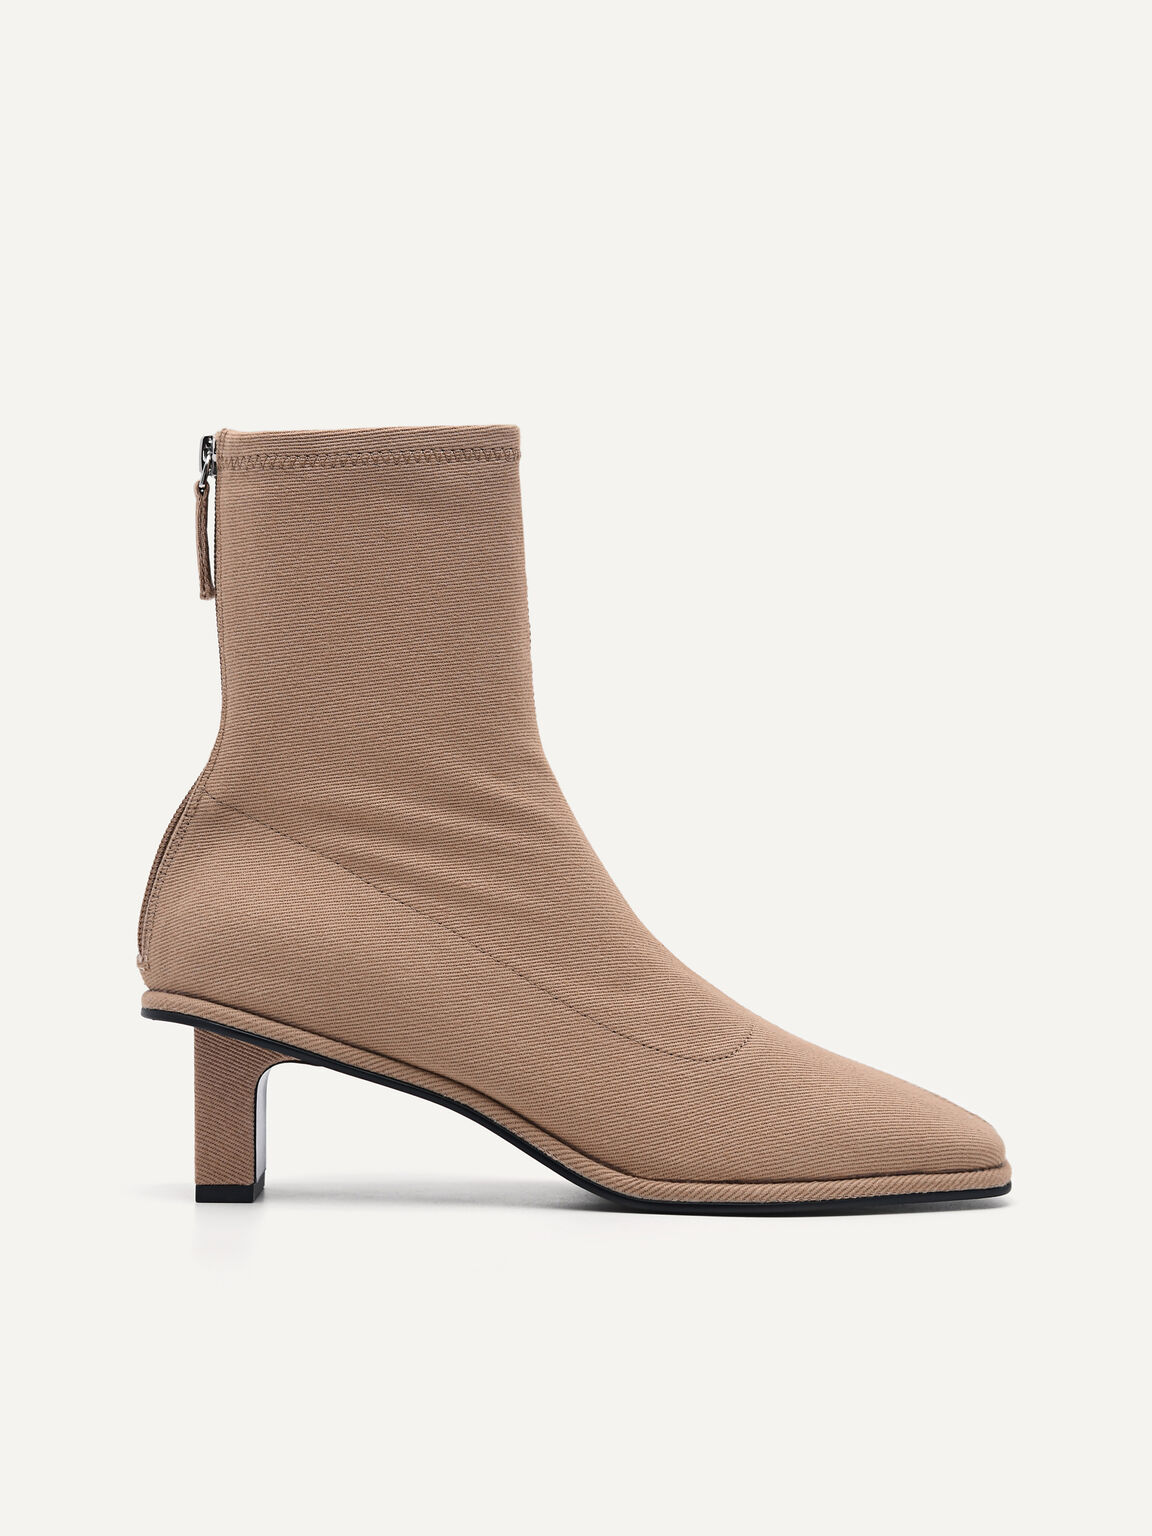 Canvas Vanessa Ankle Boots, Camel